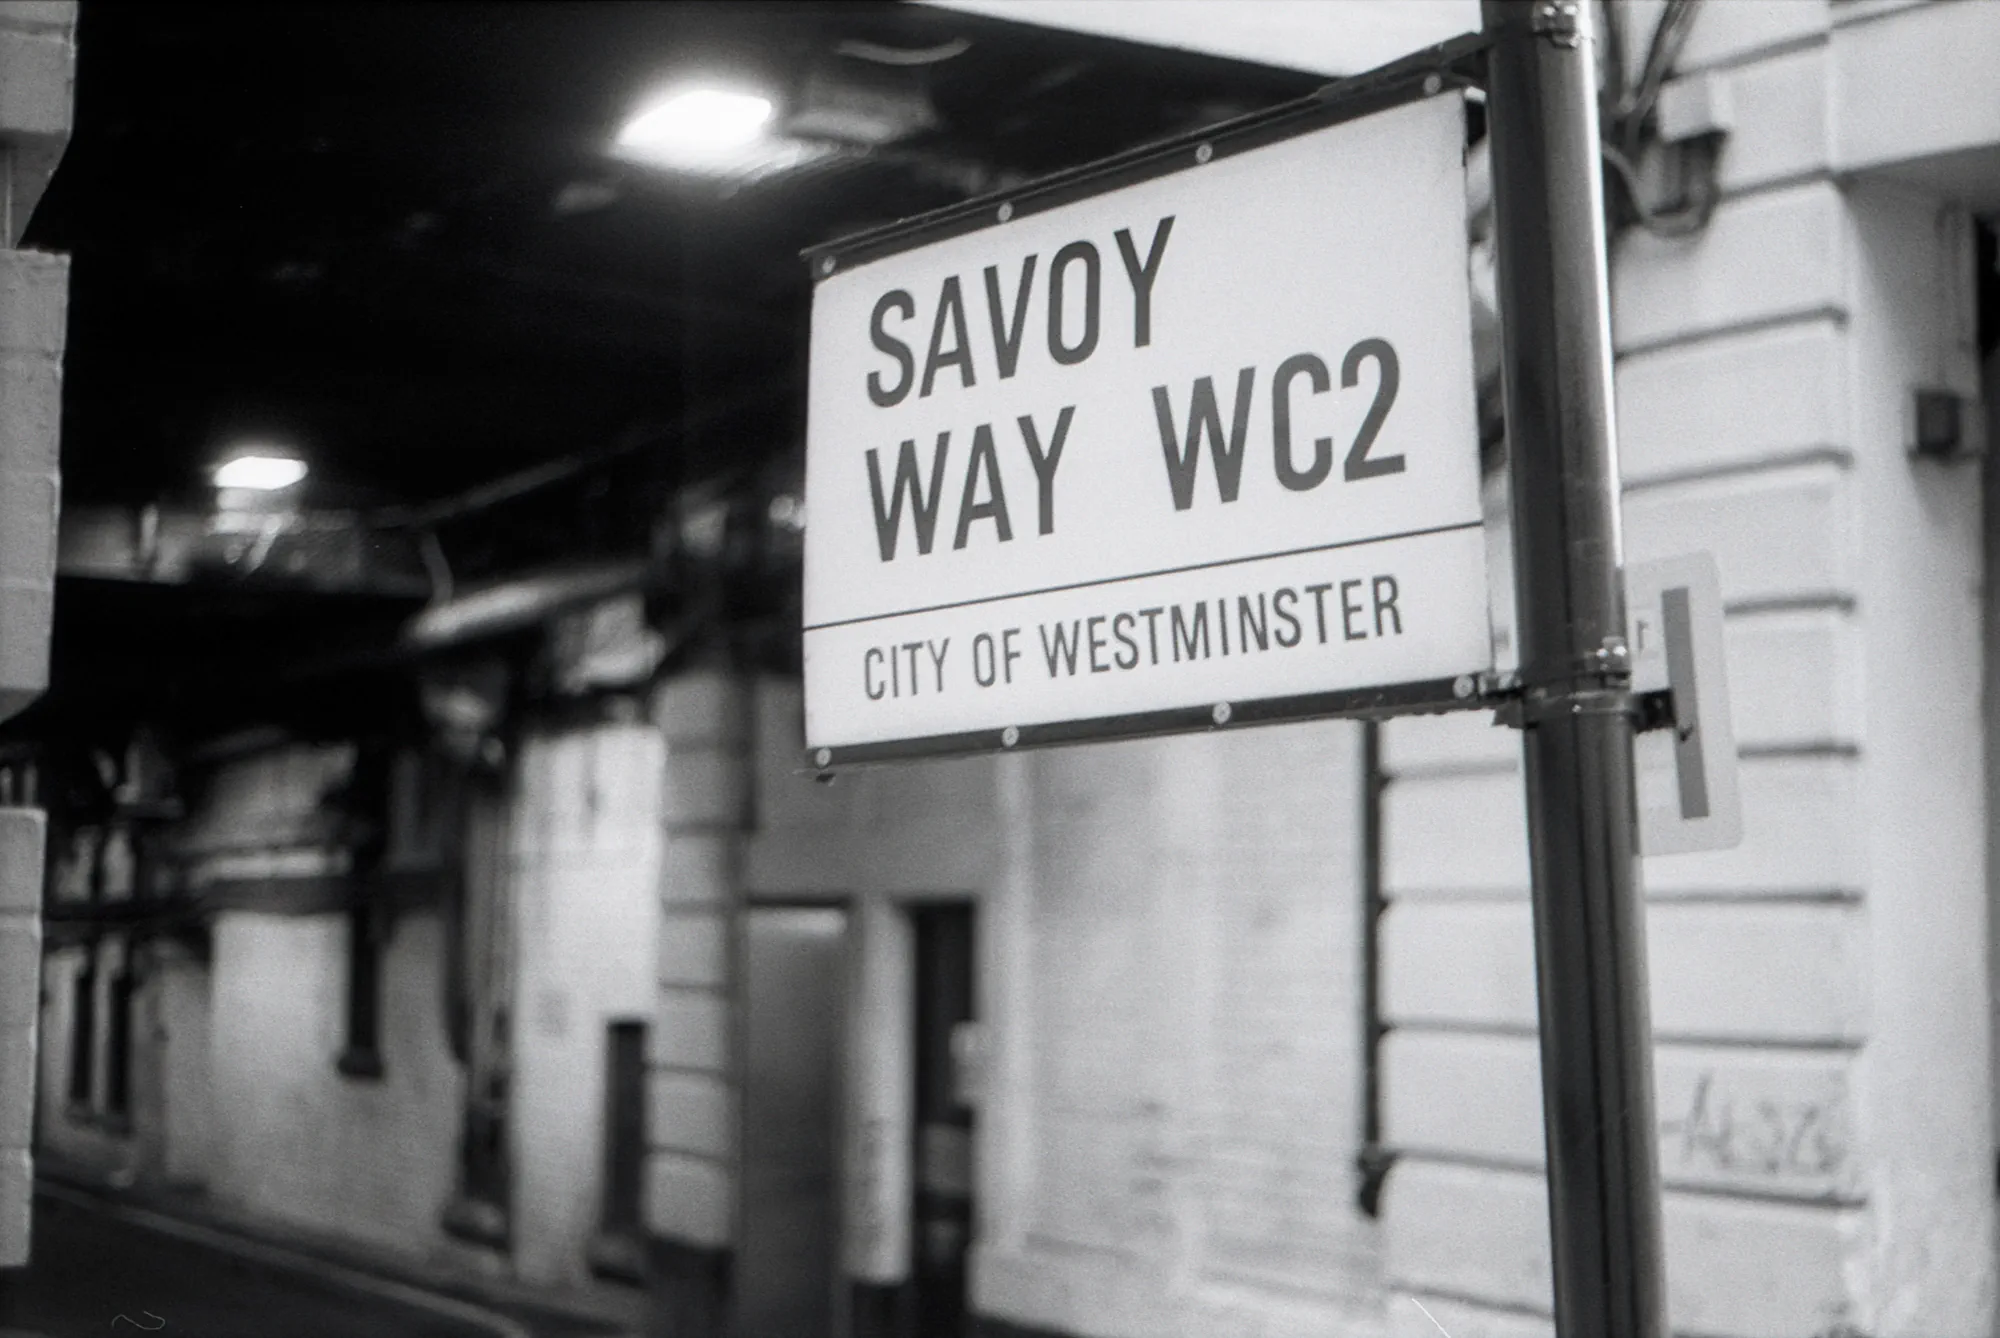 Savoy Way, City of Westminster